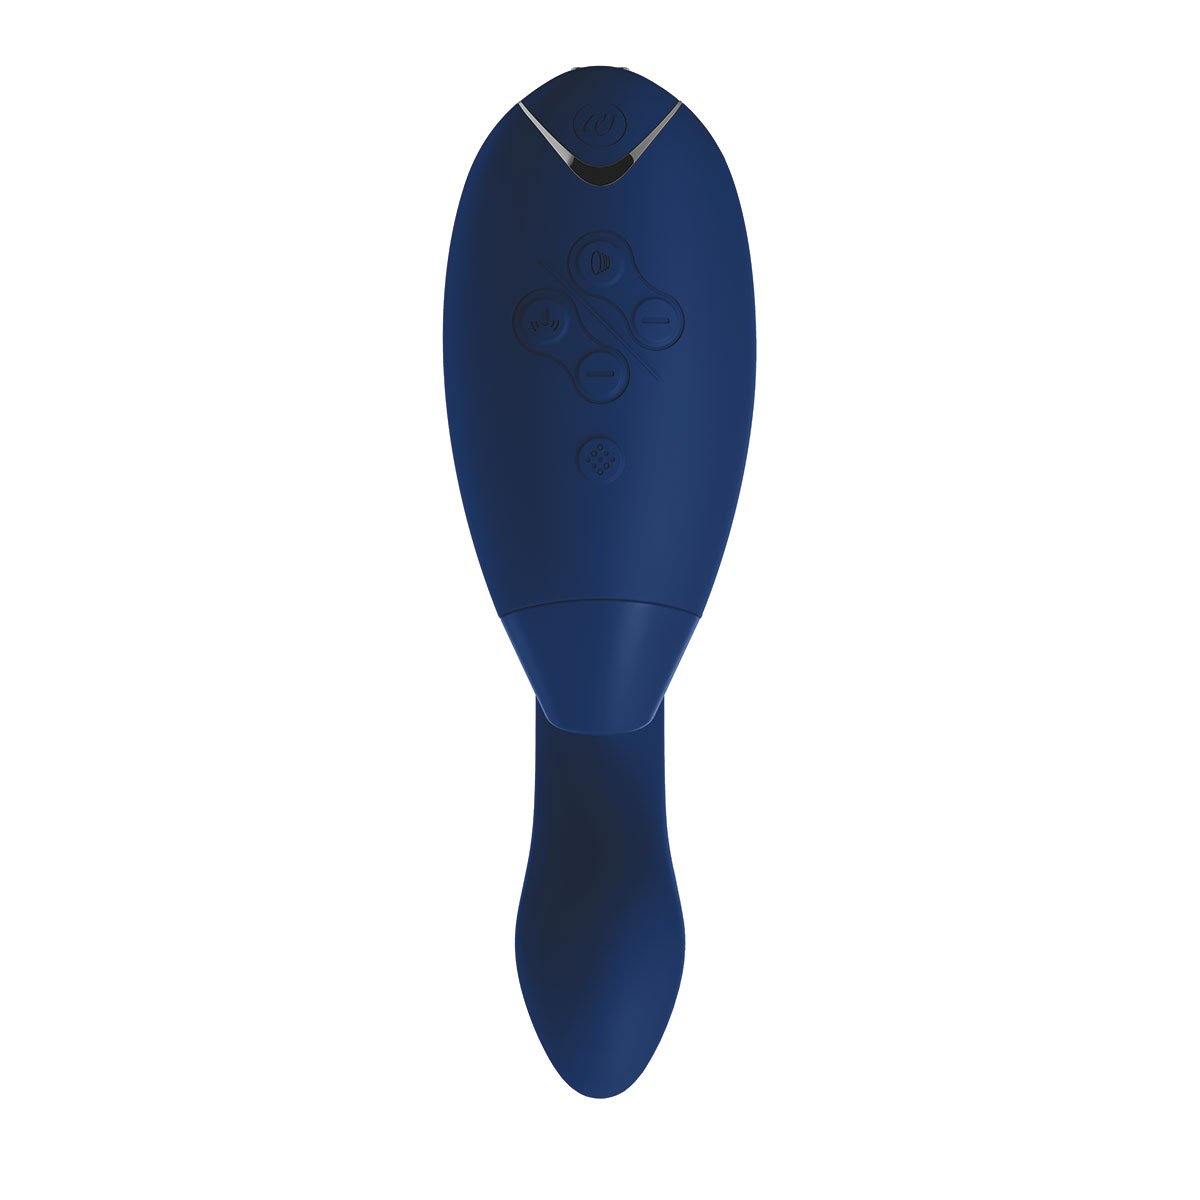 Womanizer Duo Blueberry - Buy At Luxury Toy X - Free 3-Day Shipping